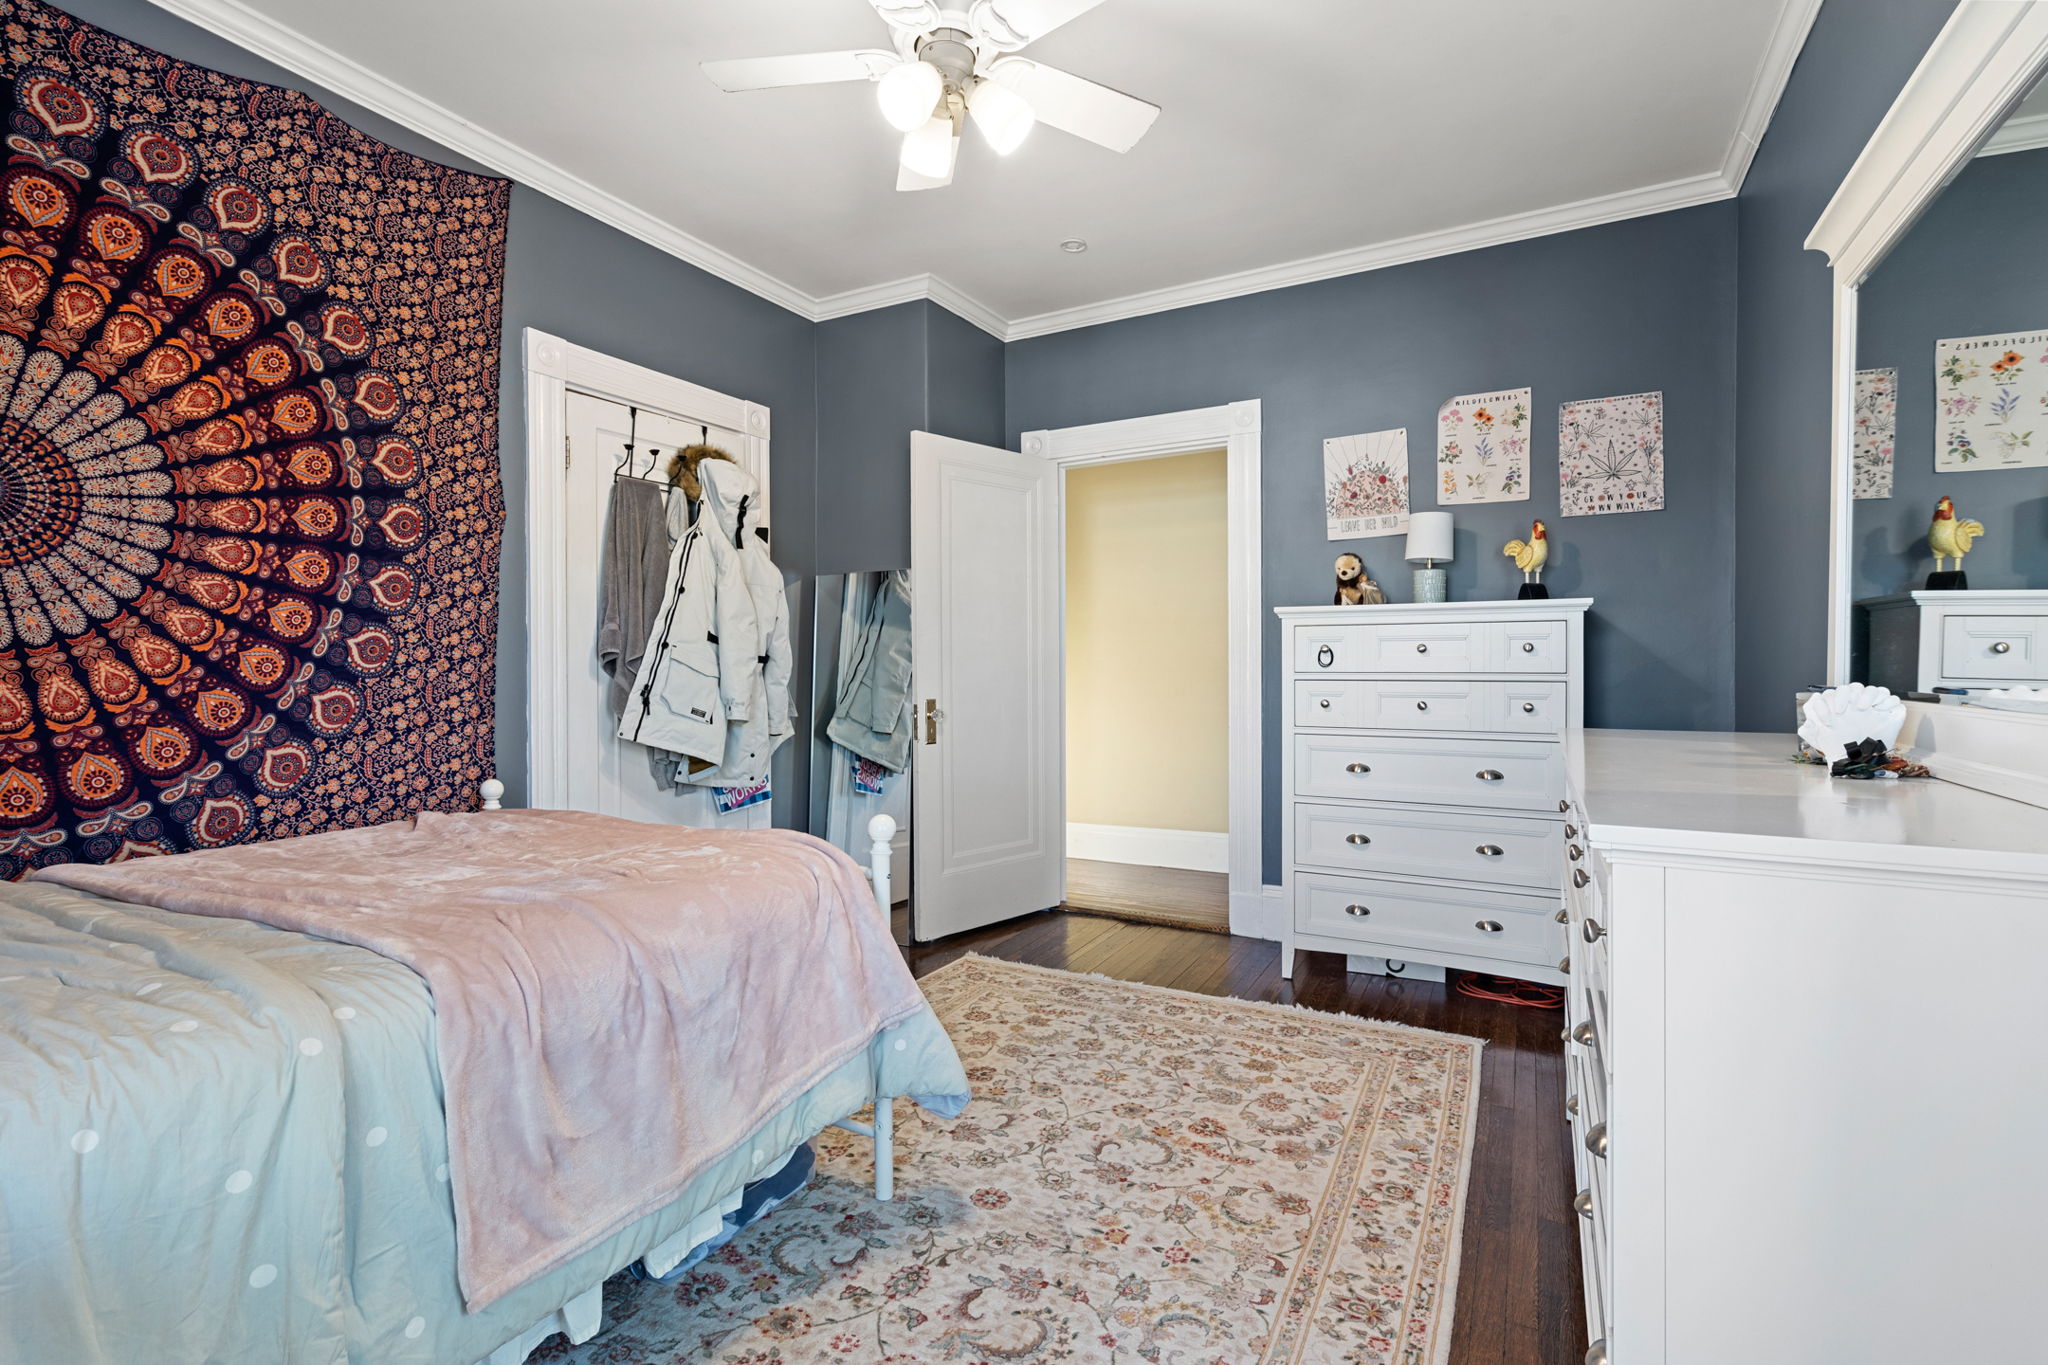 A blue bedroom with a bohemian-style fabric on the wall, blue walls, white crown molding, a bed with a pink throw, white furniture, and a ceiling fan.